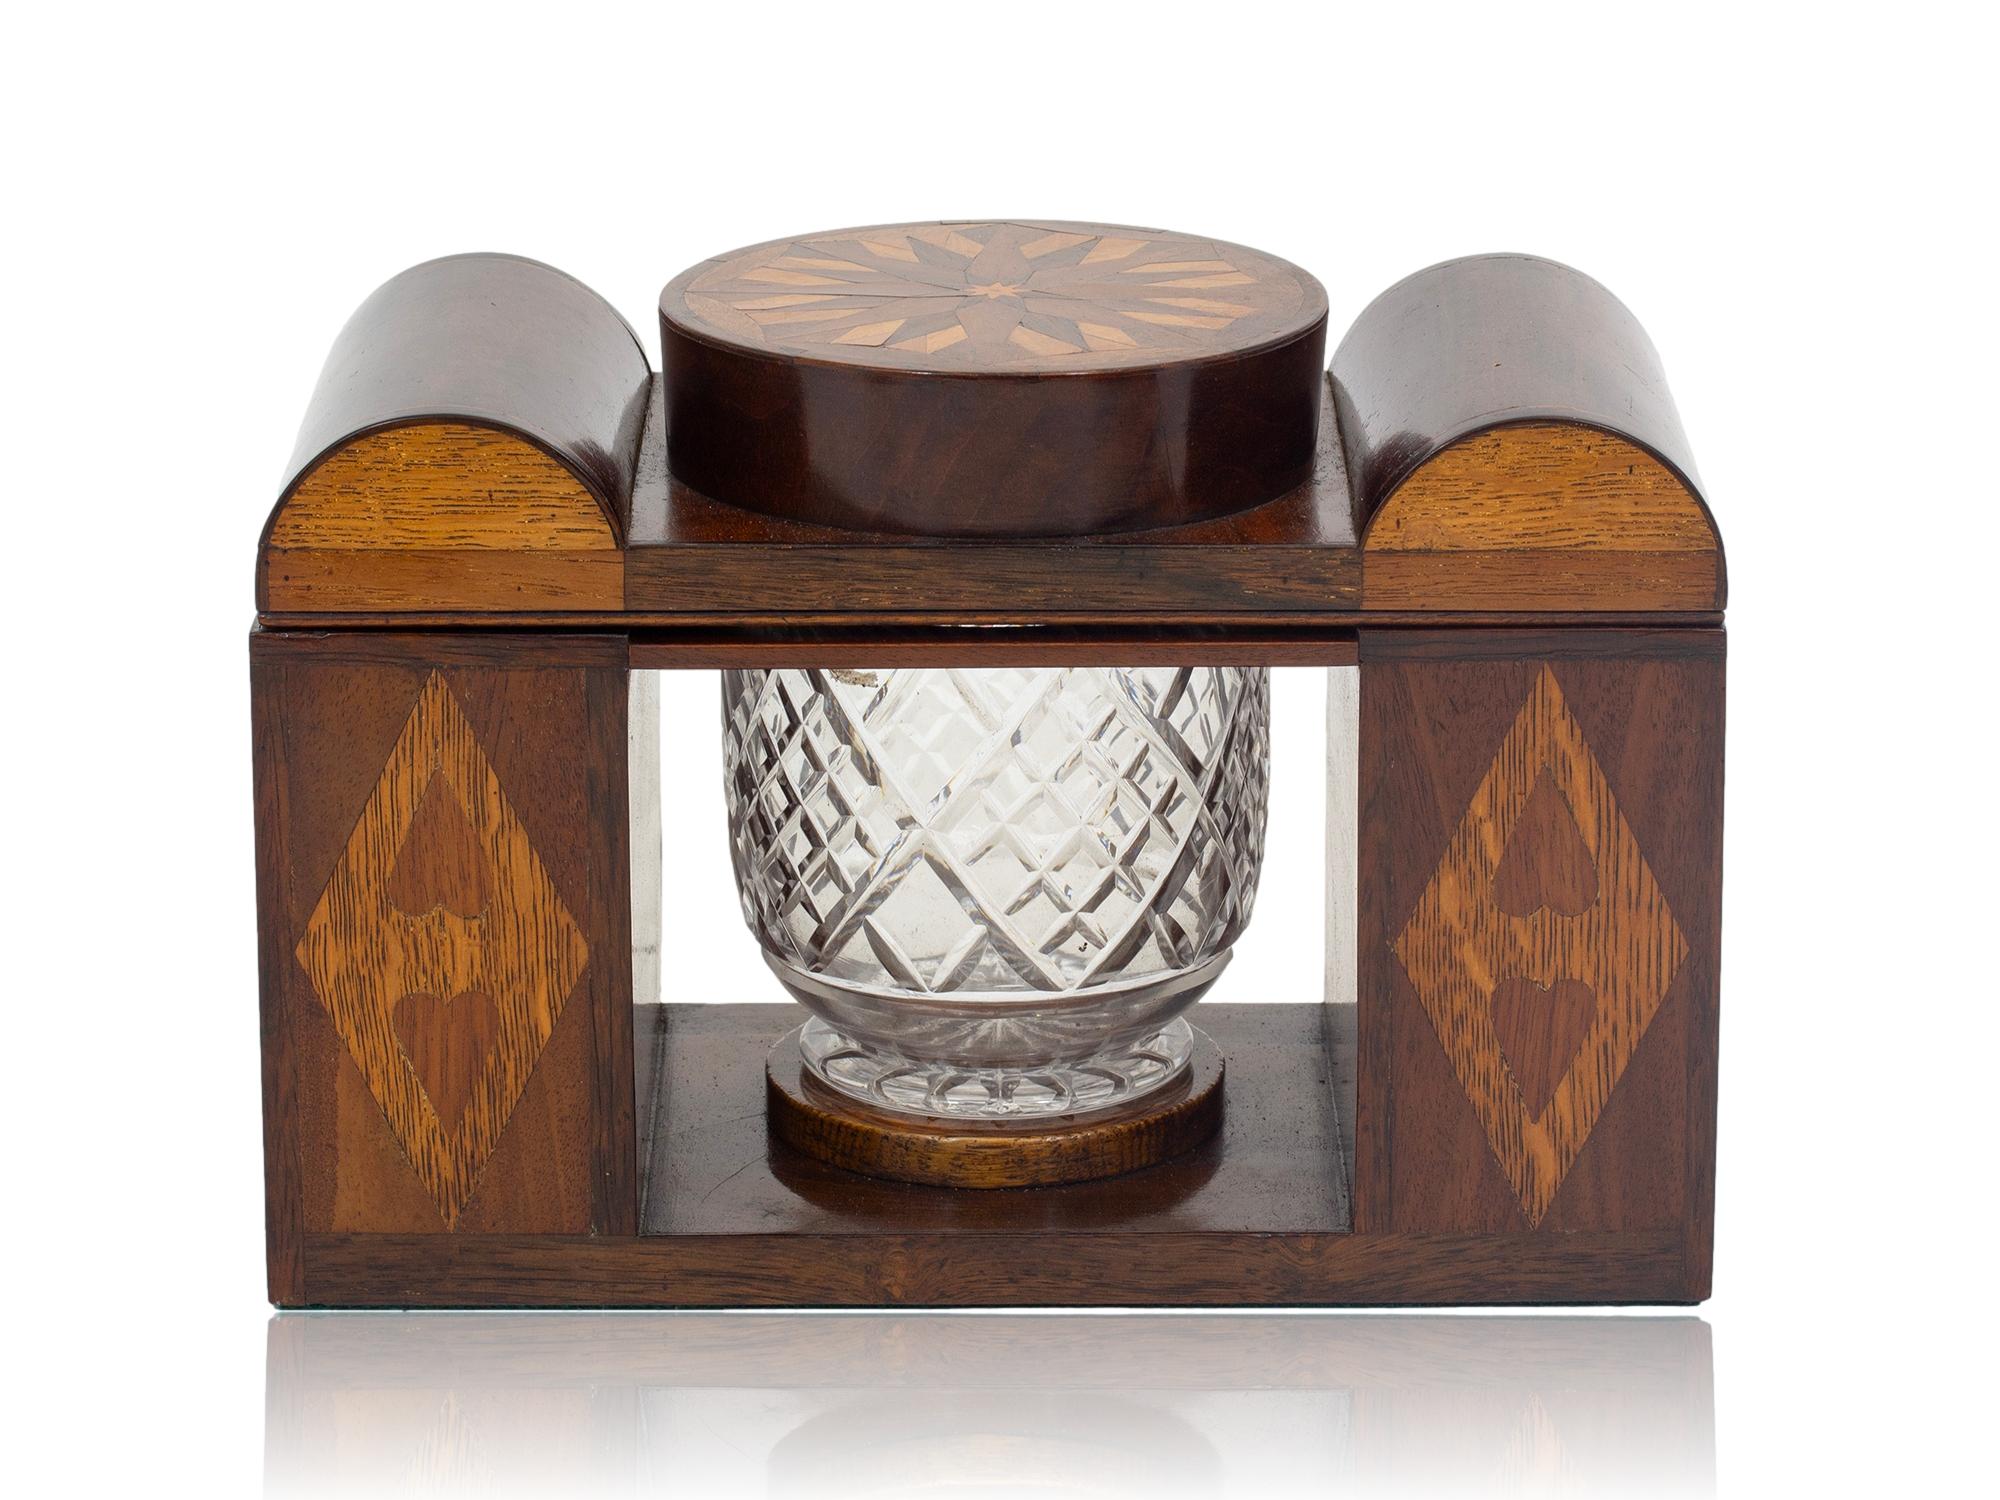 Featuring Inlaid Hearts and Diamonds

From our Tea Caddy collection we a pleased to offer this unusual Victorian Marquetry Tea Caddy. The Tea Caddy of unusual form with two outer Tea Caddies with domed lids and a central circular lid which houses